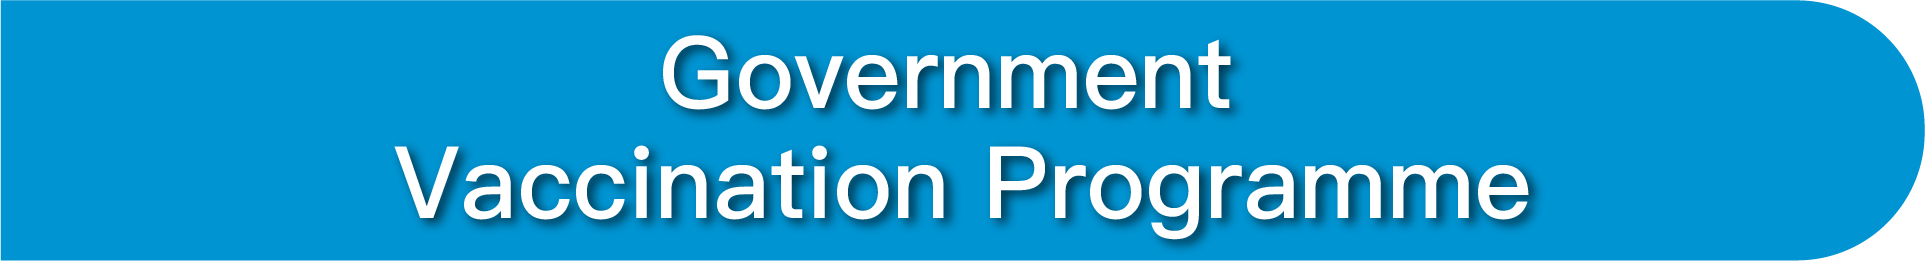 Government Vaccination Programme